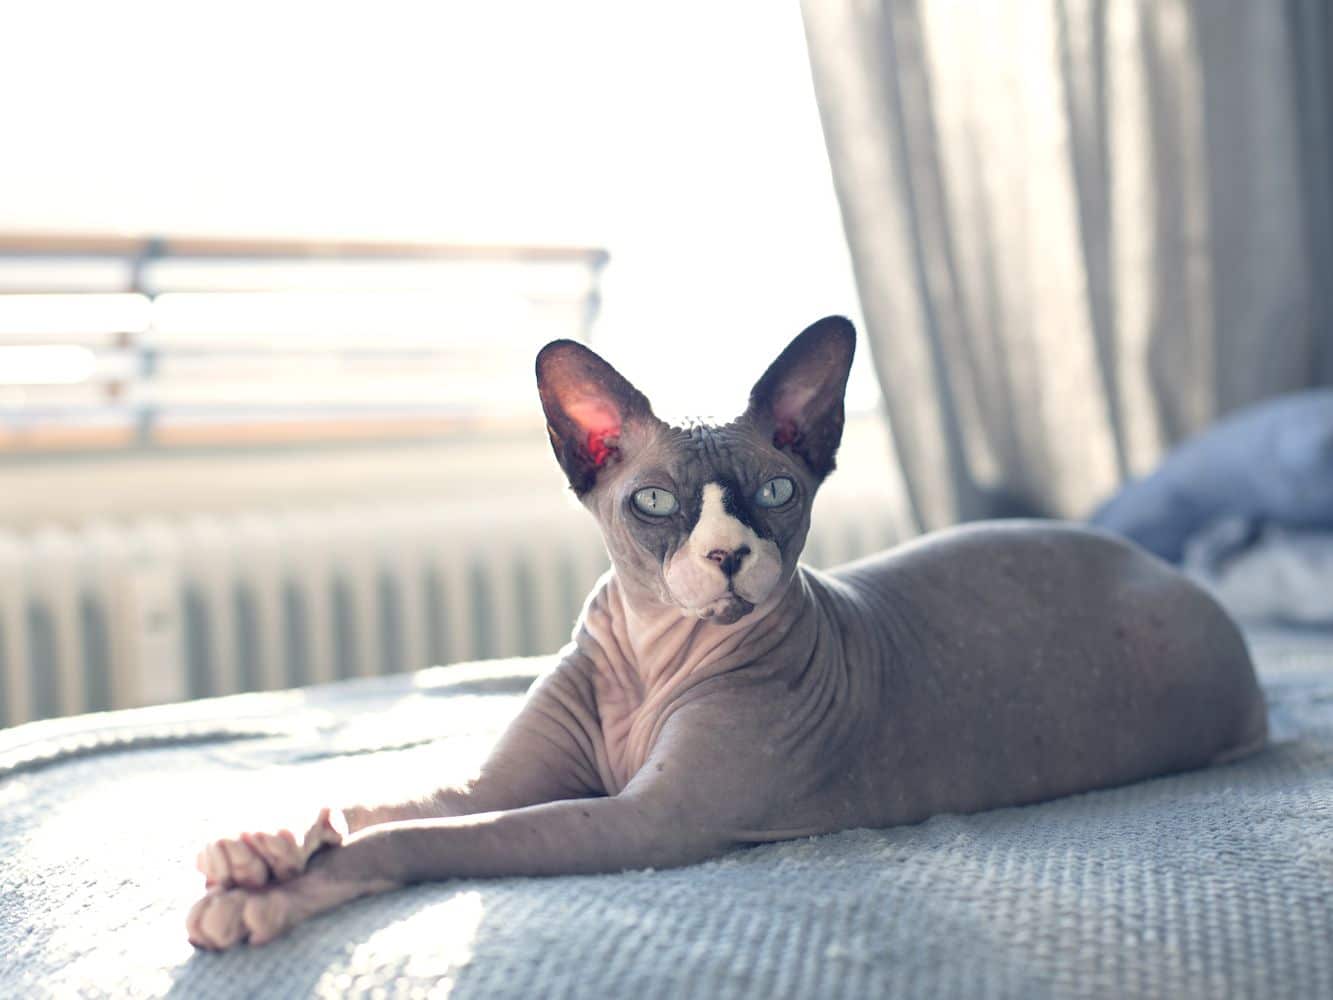 Top 10 Most Expensive Cat Breeds in the World